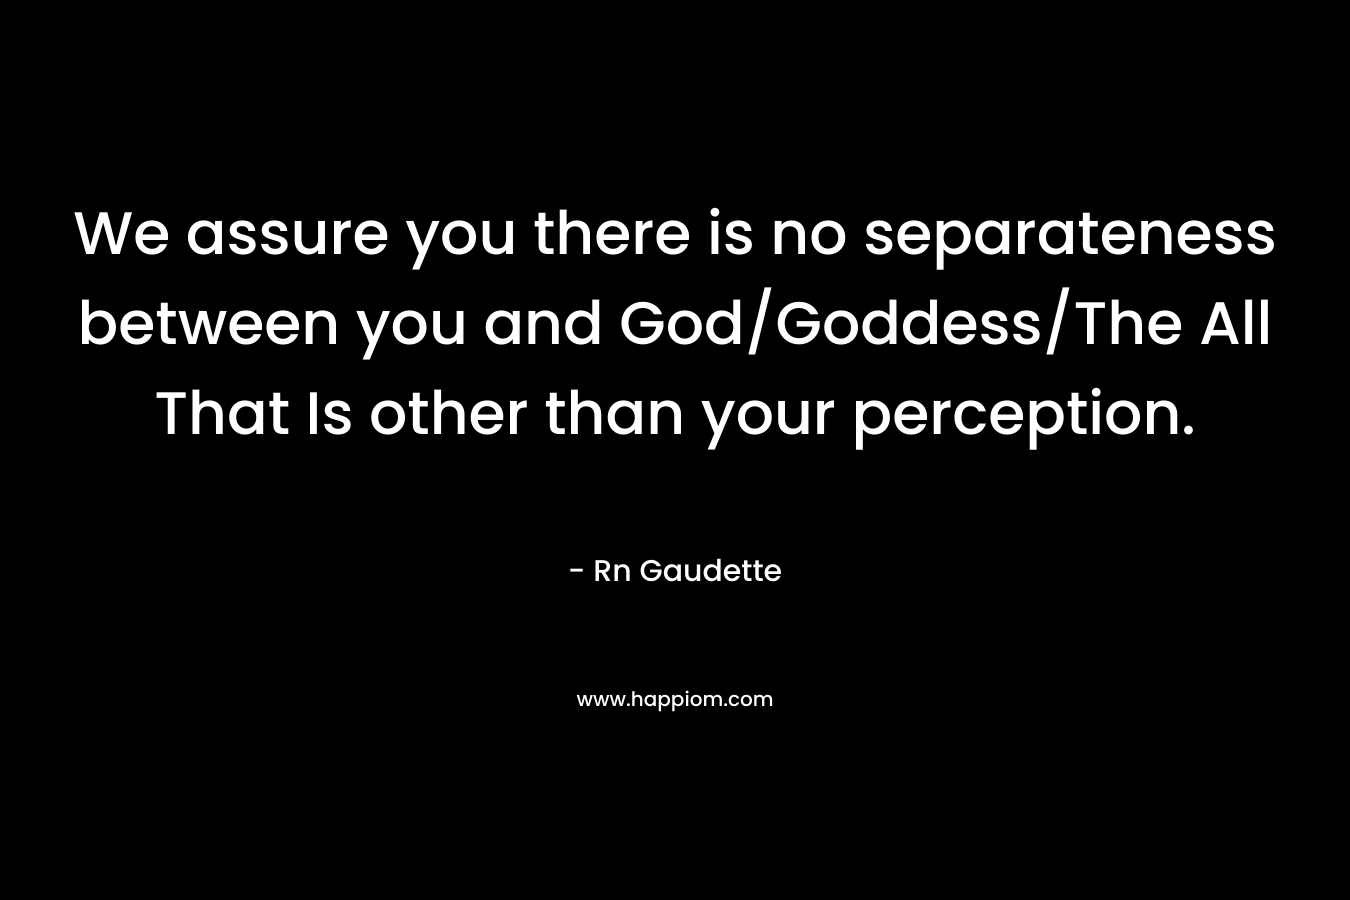 We assure you there is no separateness between you and God/Goddess/The All That Is other than your perception.